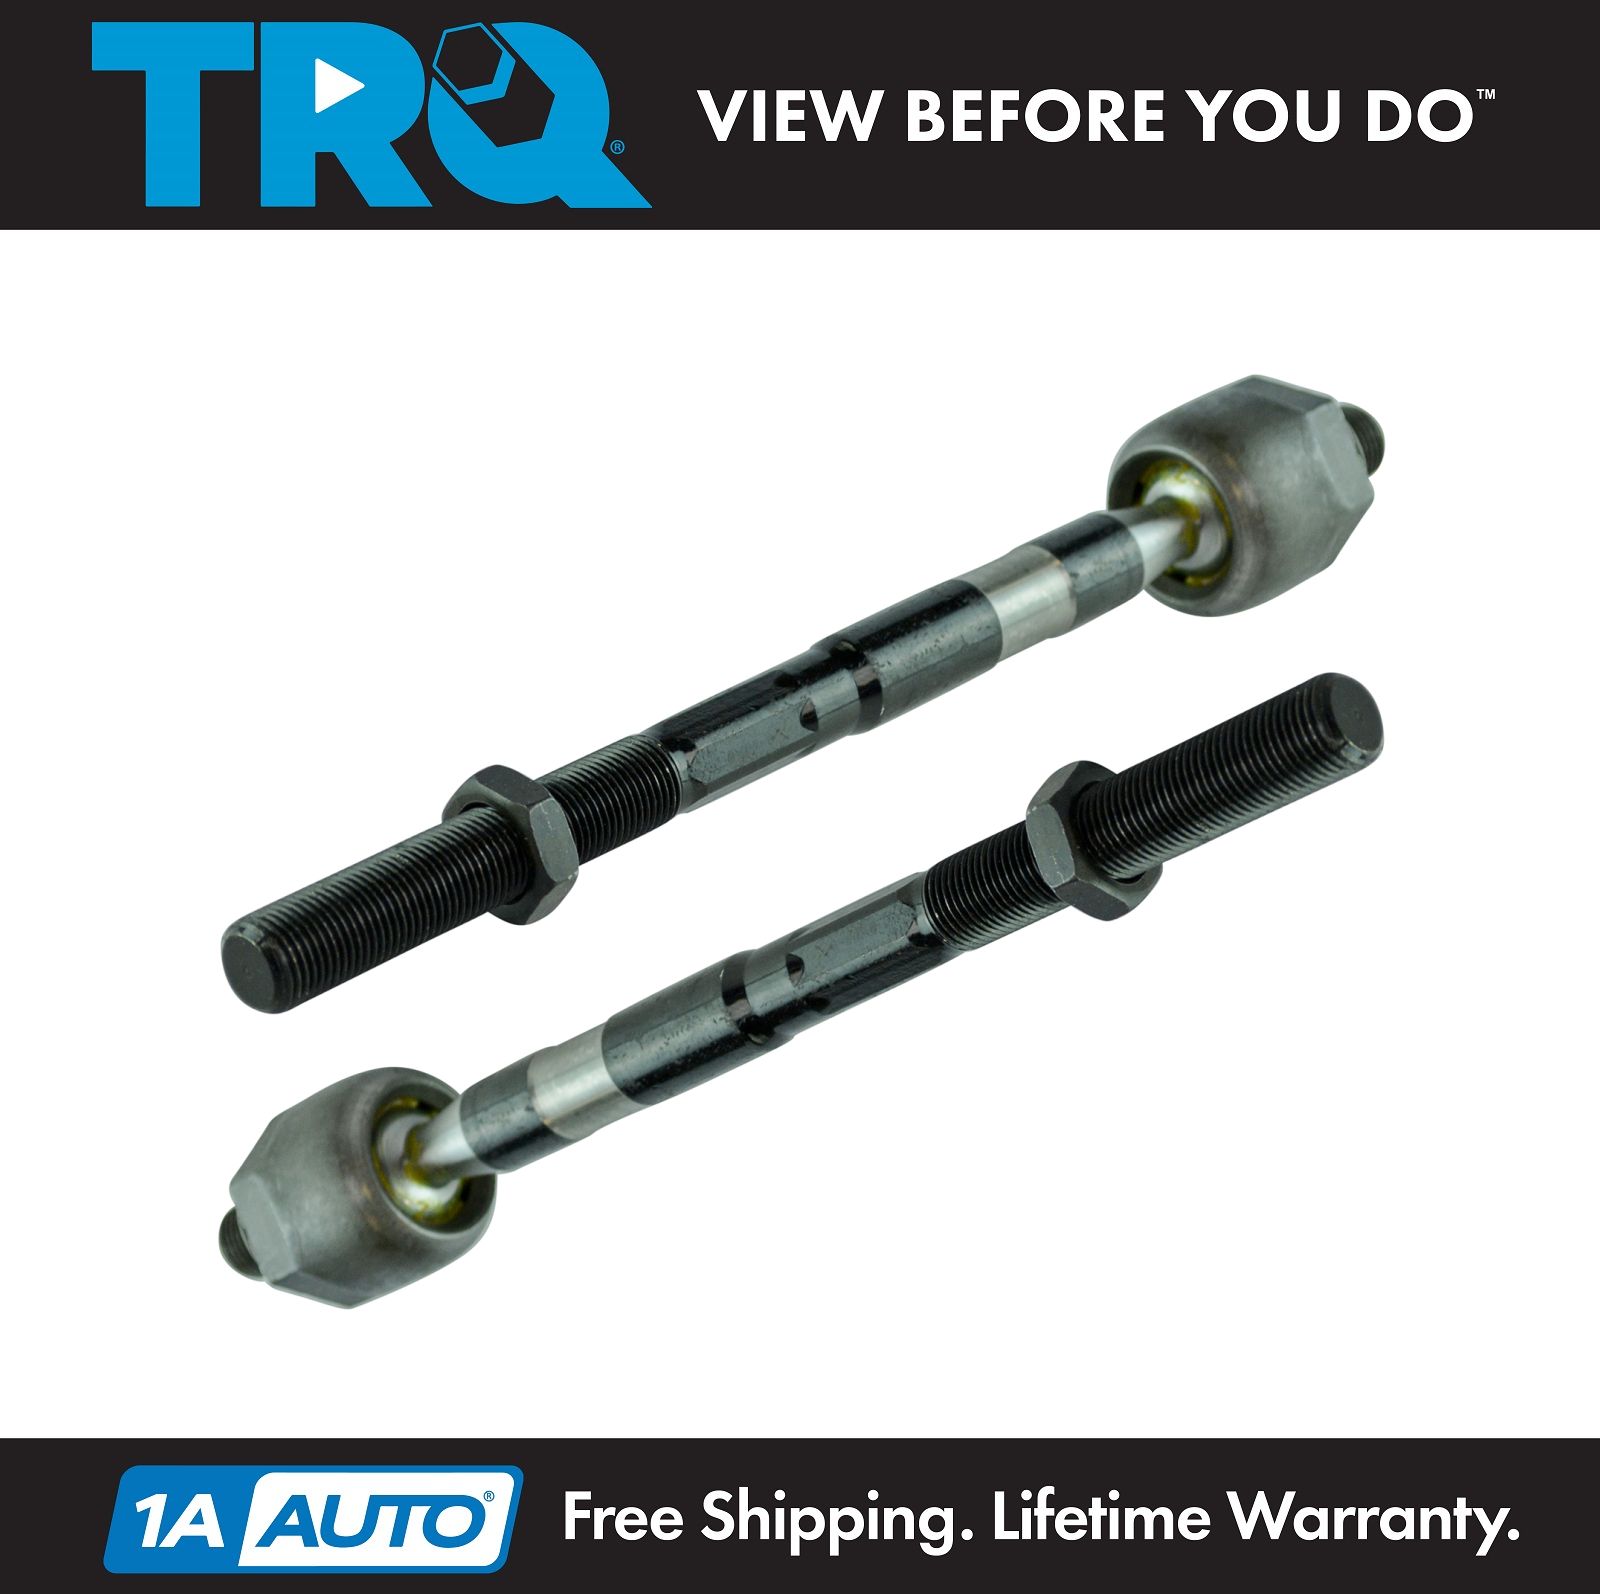 Front Steering Tie Rod End Kit For Chevrolet Colorado GMC Canyon Isuzu i-370